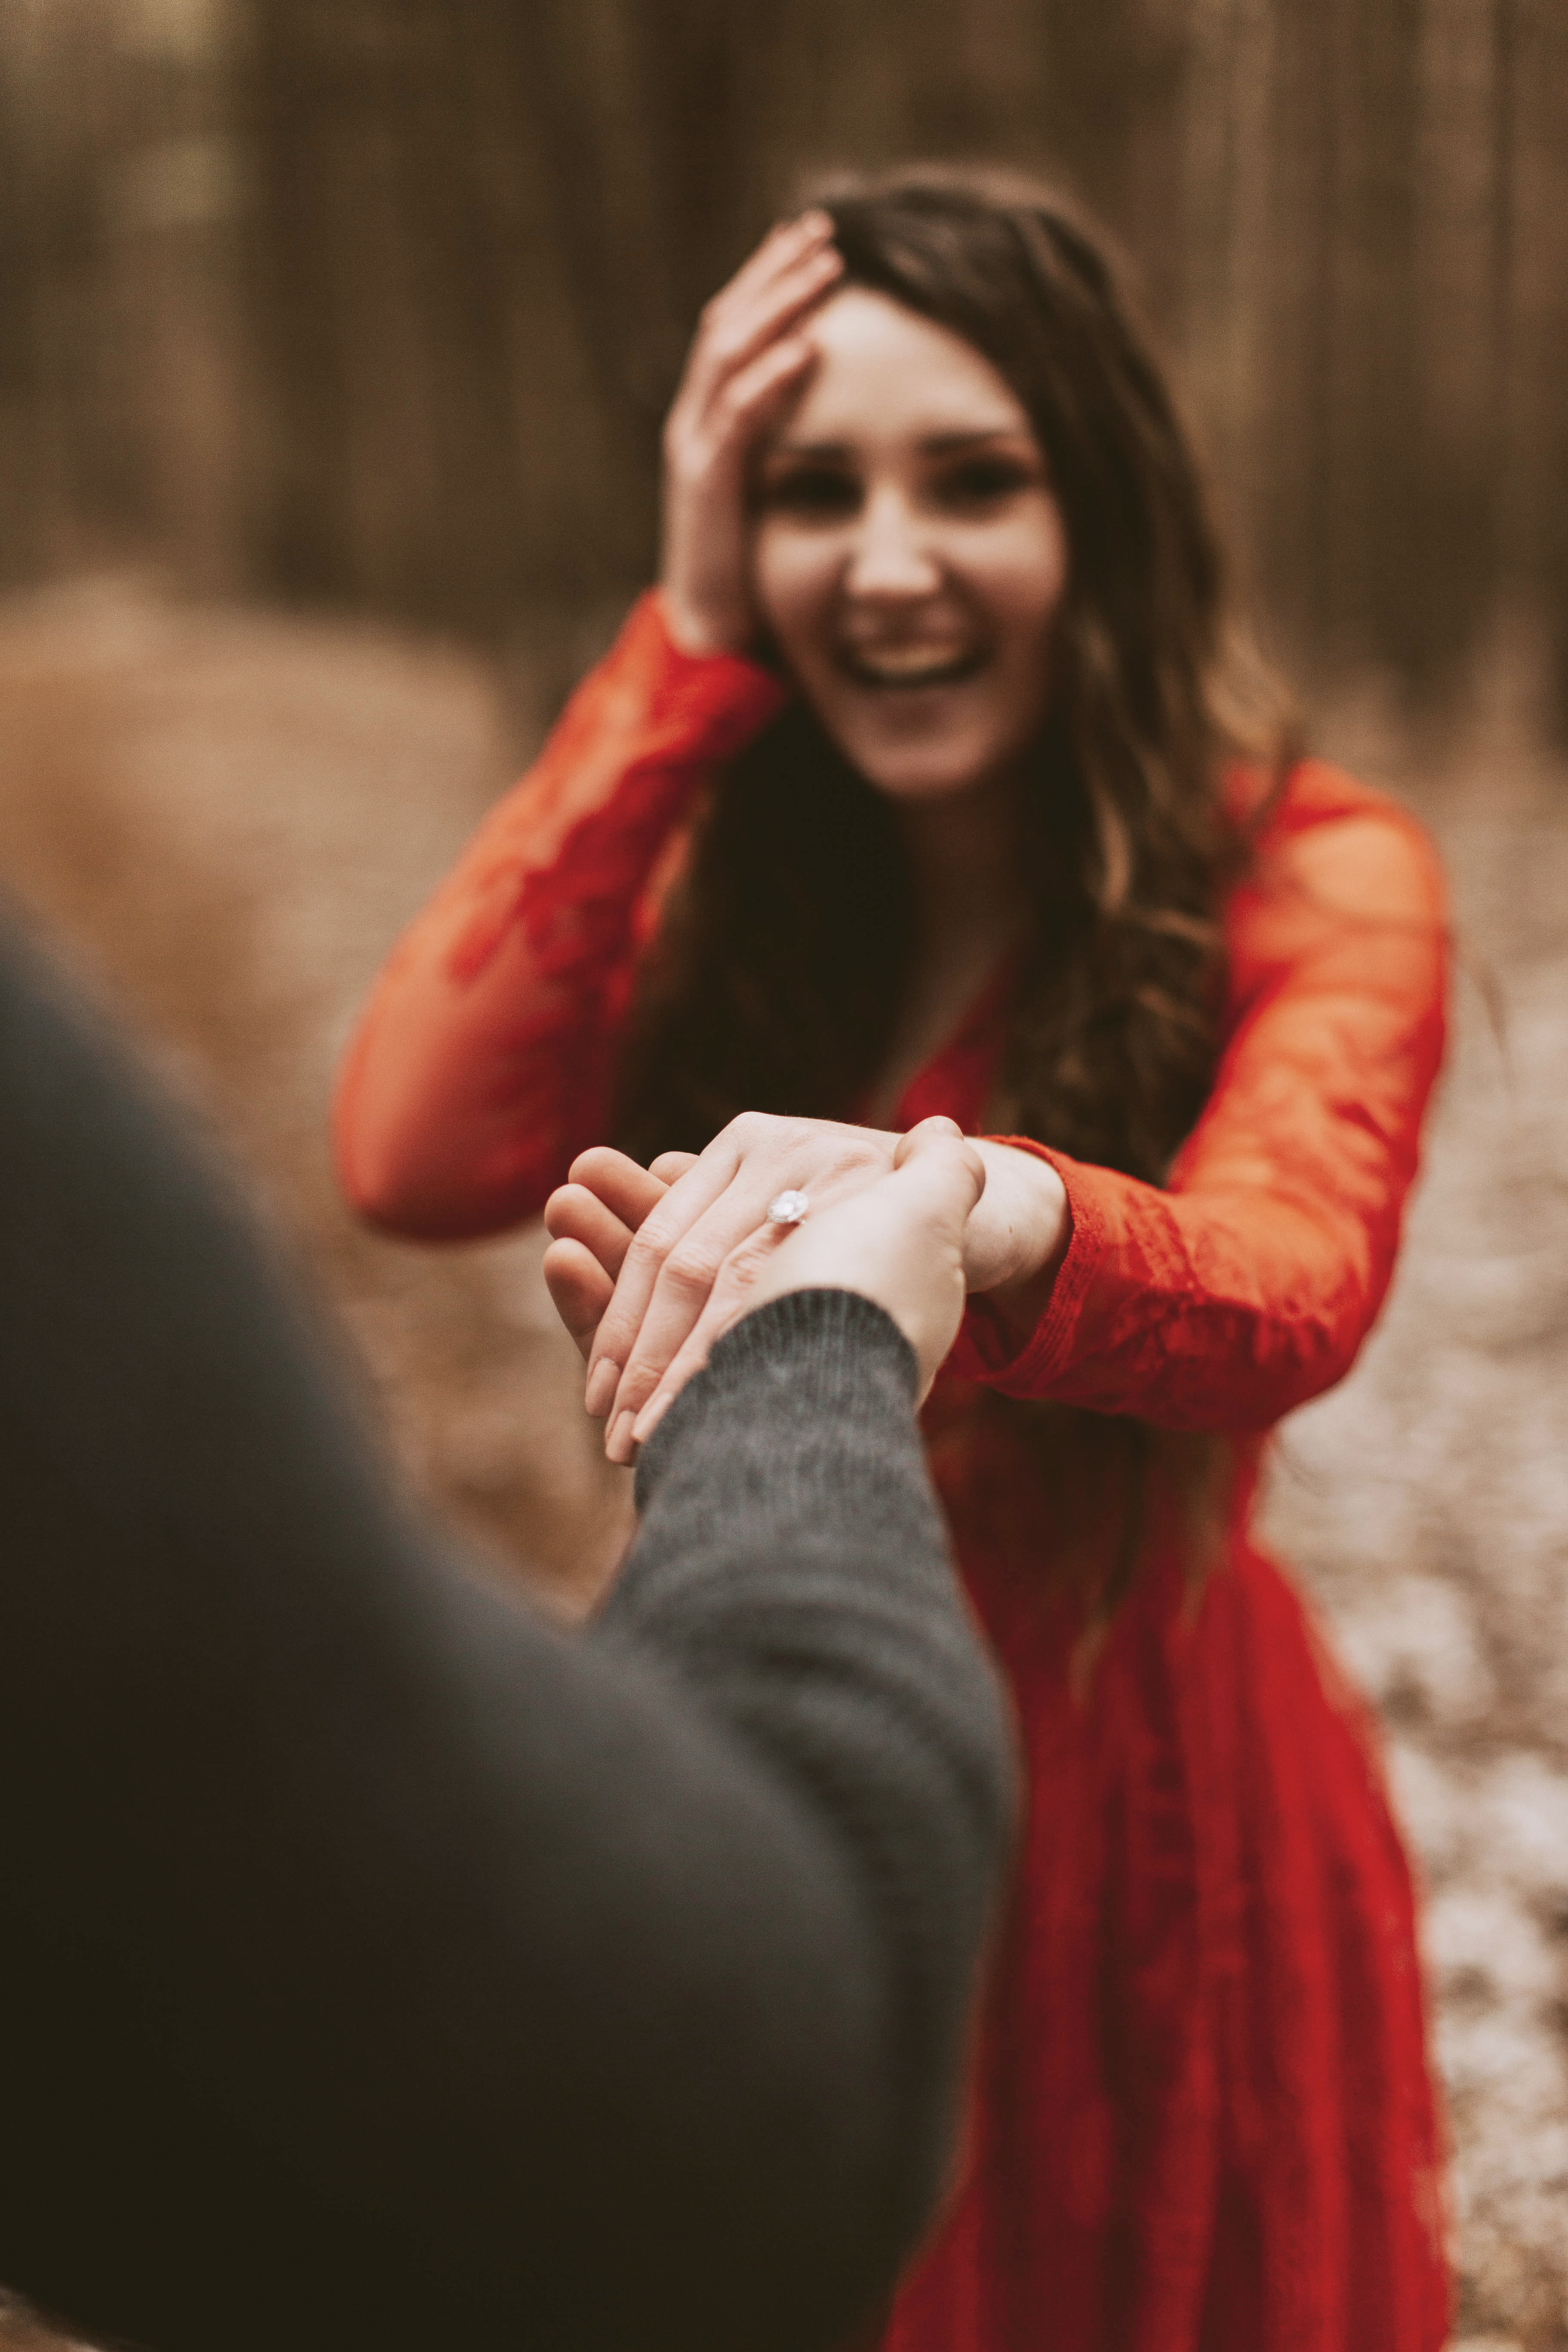 A surprised and happy woman in a red dress extends her hand to receive her new engagement ring from her fiance.